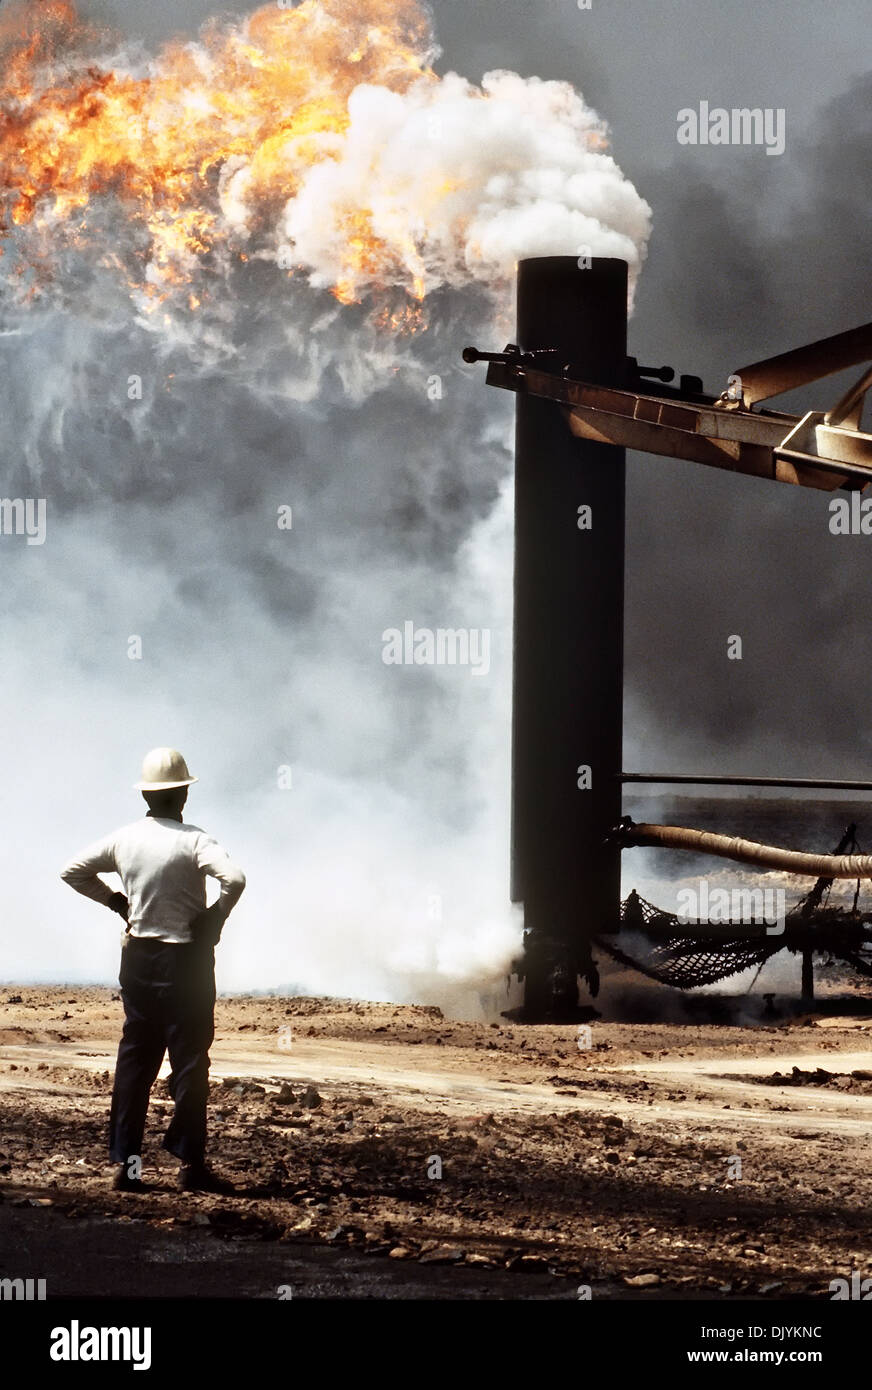 Firefighters from the Boots and Coots Oil Well Firefighting Company use a crane to cap a blazing oil well in the aftermath of Operation Desert Storm April 7, 1991 in the Ahman Oil Fields, Kuwait. The well, situated in the Ahman Oil Fields, is one of many set afire by Iraqi forces prior to their retreat from Kuwait. Stock Photo